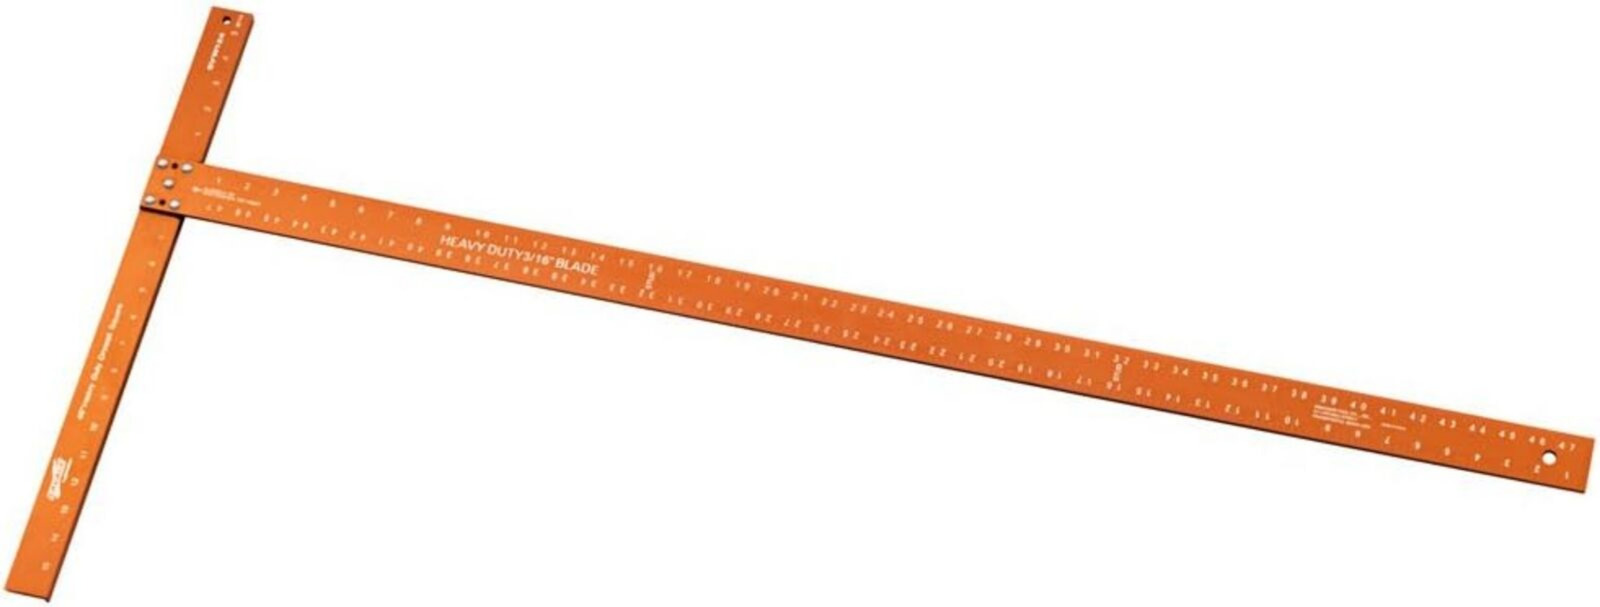 48-Inch-1/8-Inch Wallboard T Square, Resistant To Twisting and Bending